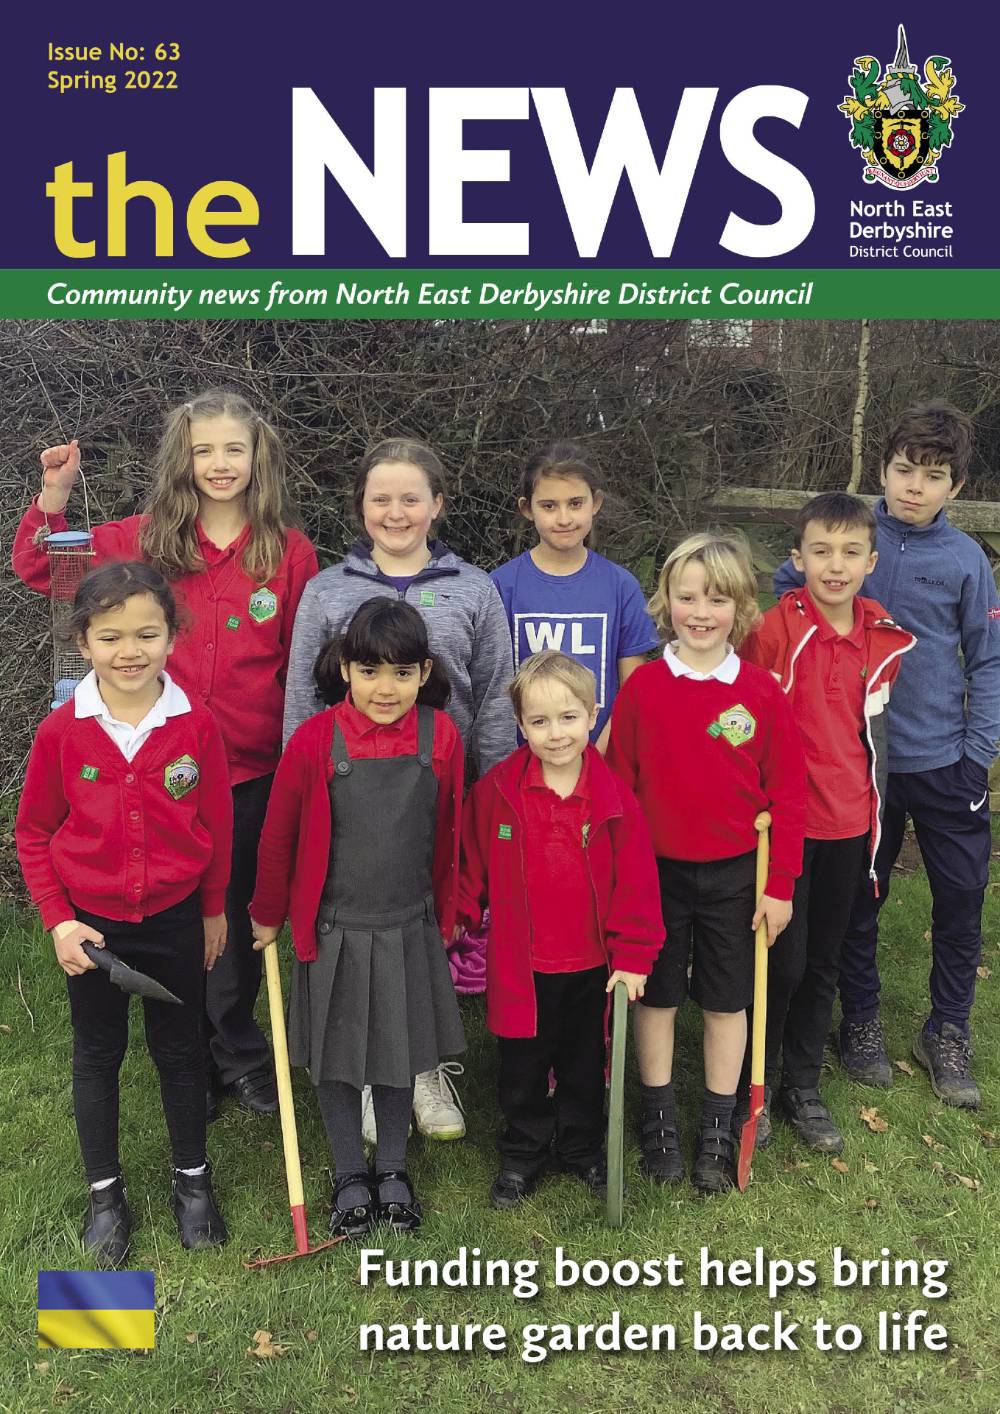 the NEWs front cover featuring image of children holding gardening equipment